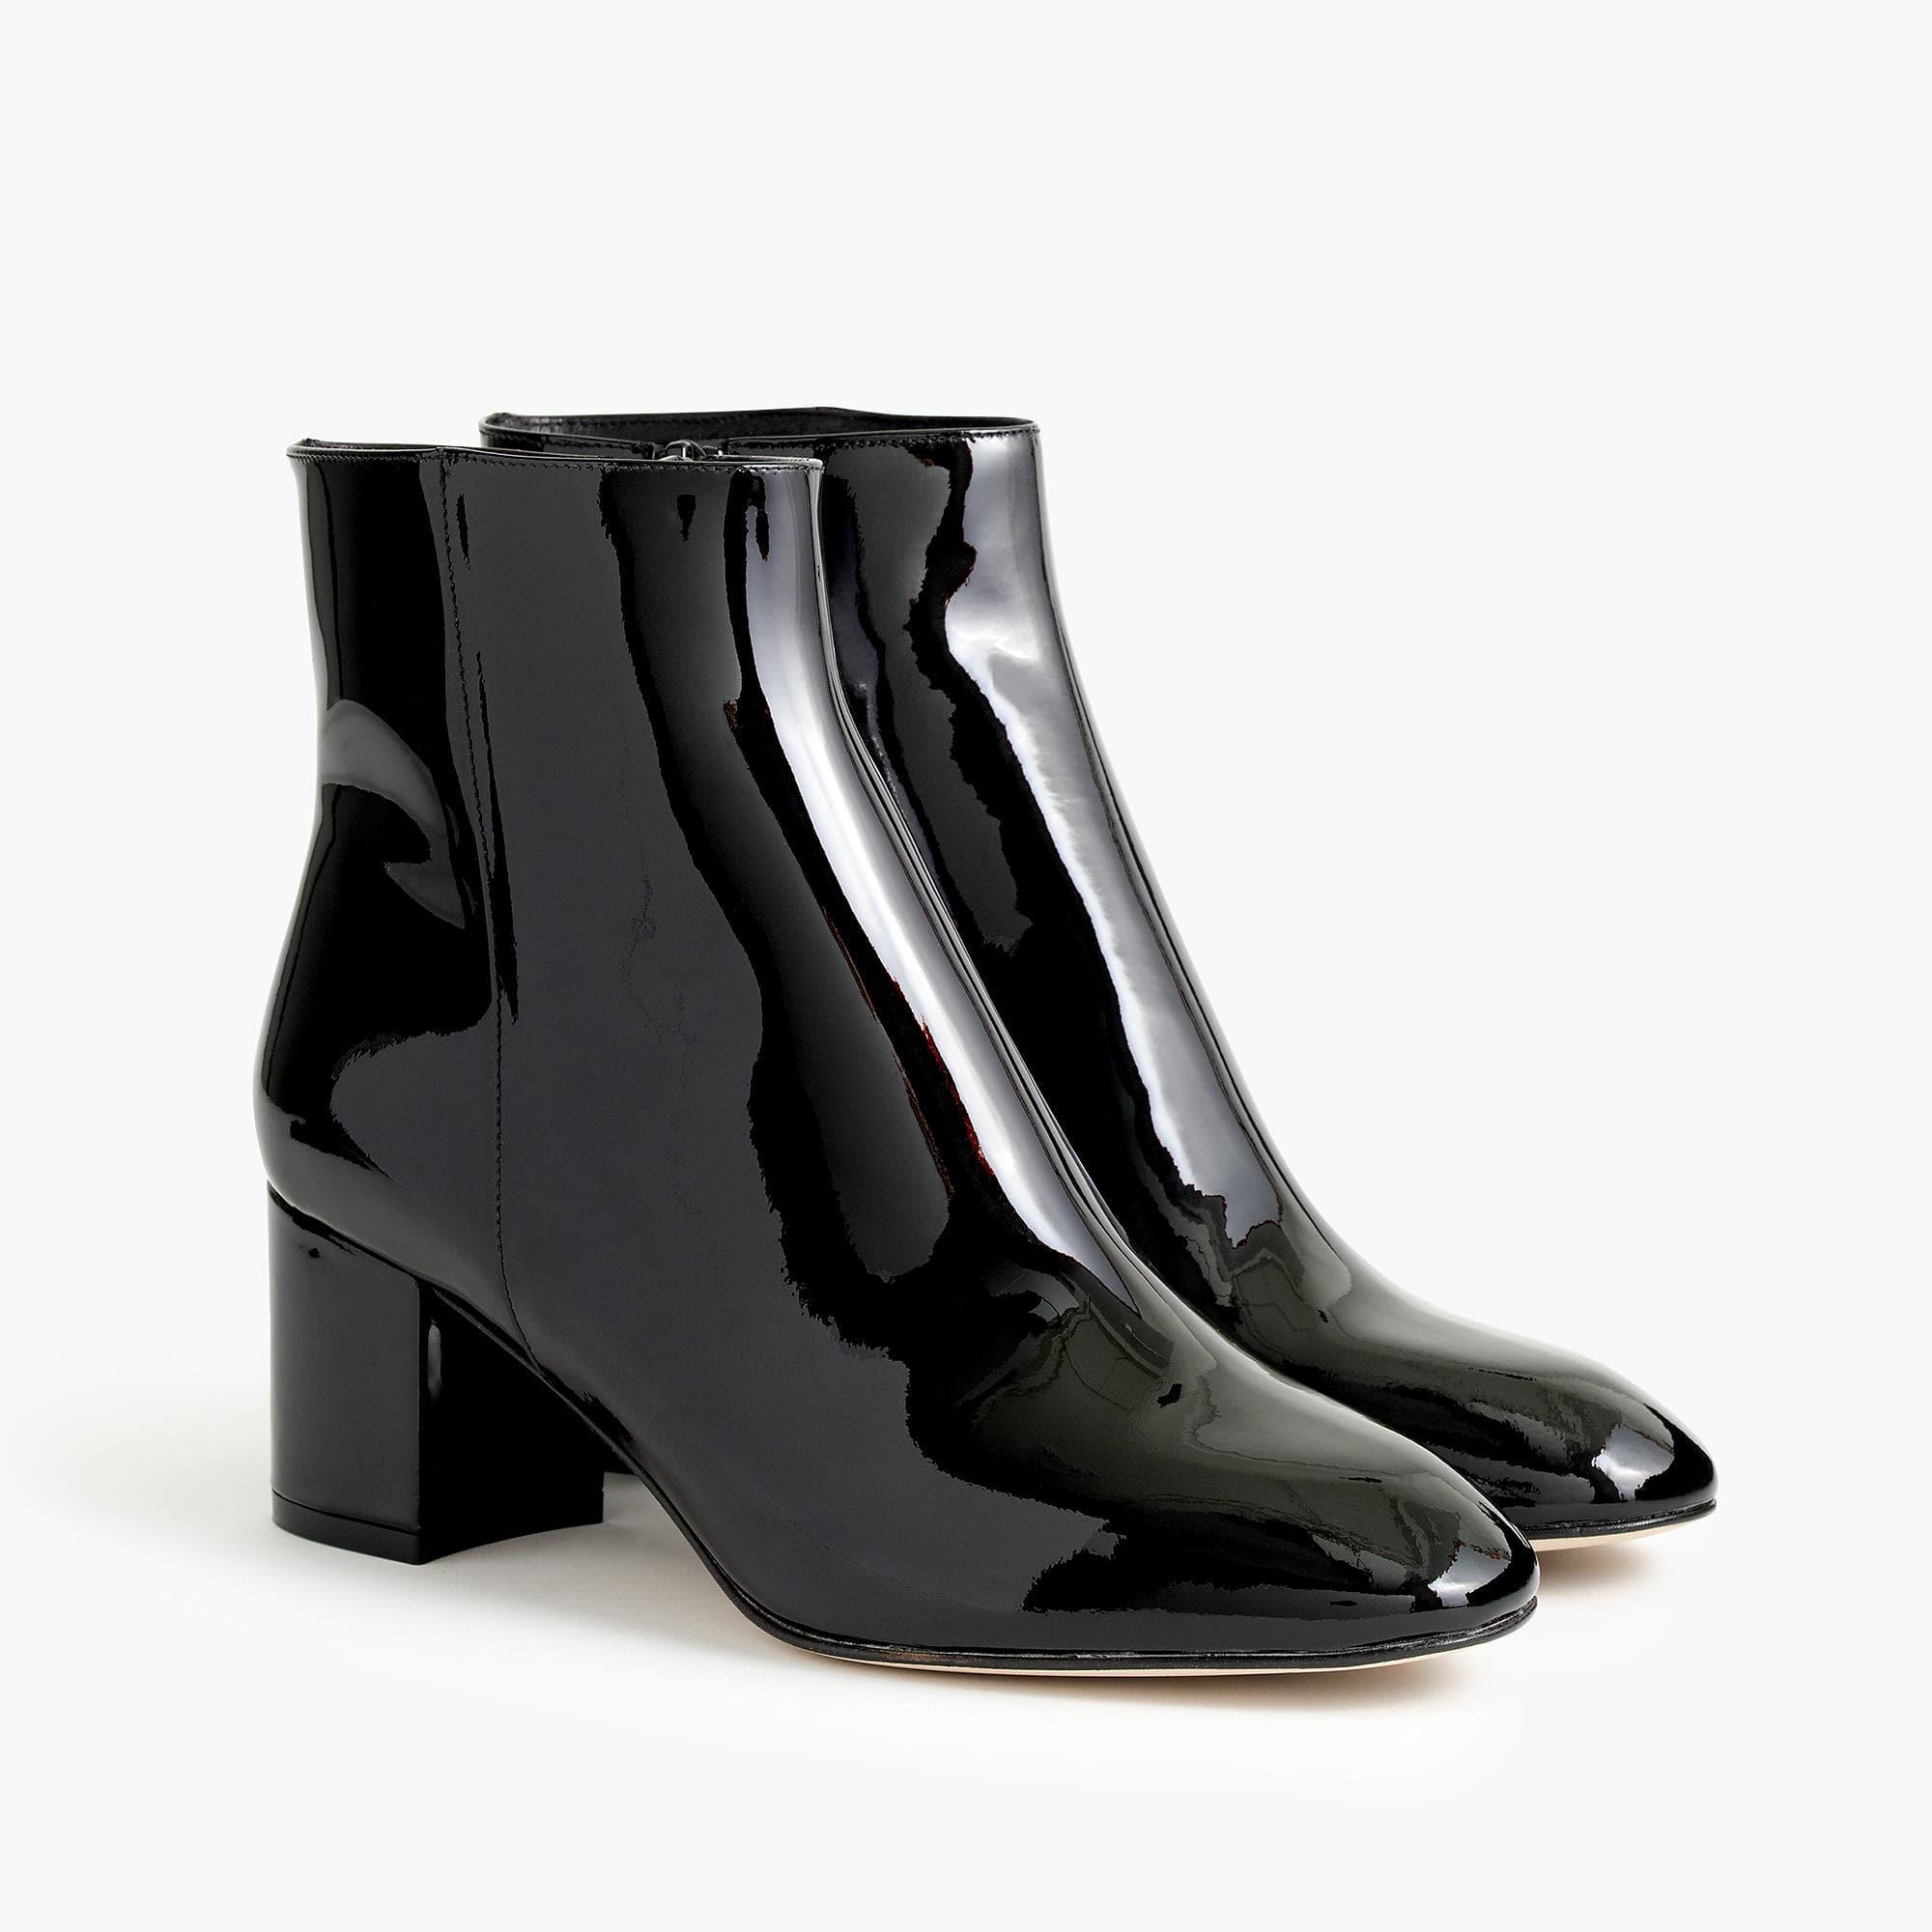 J.Crew Hadley Patent Leather Boots in Black - Lyst